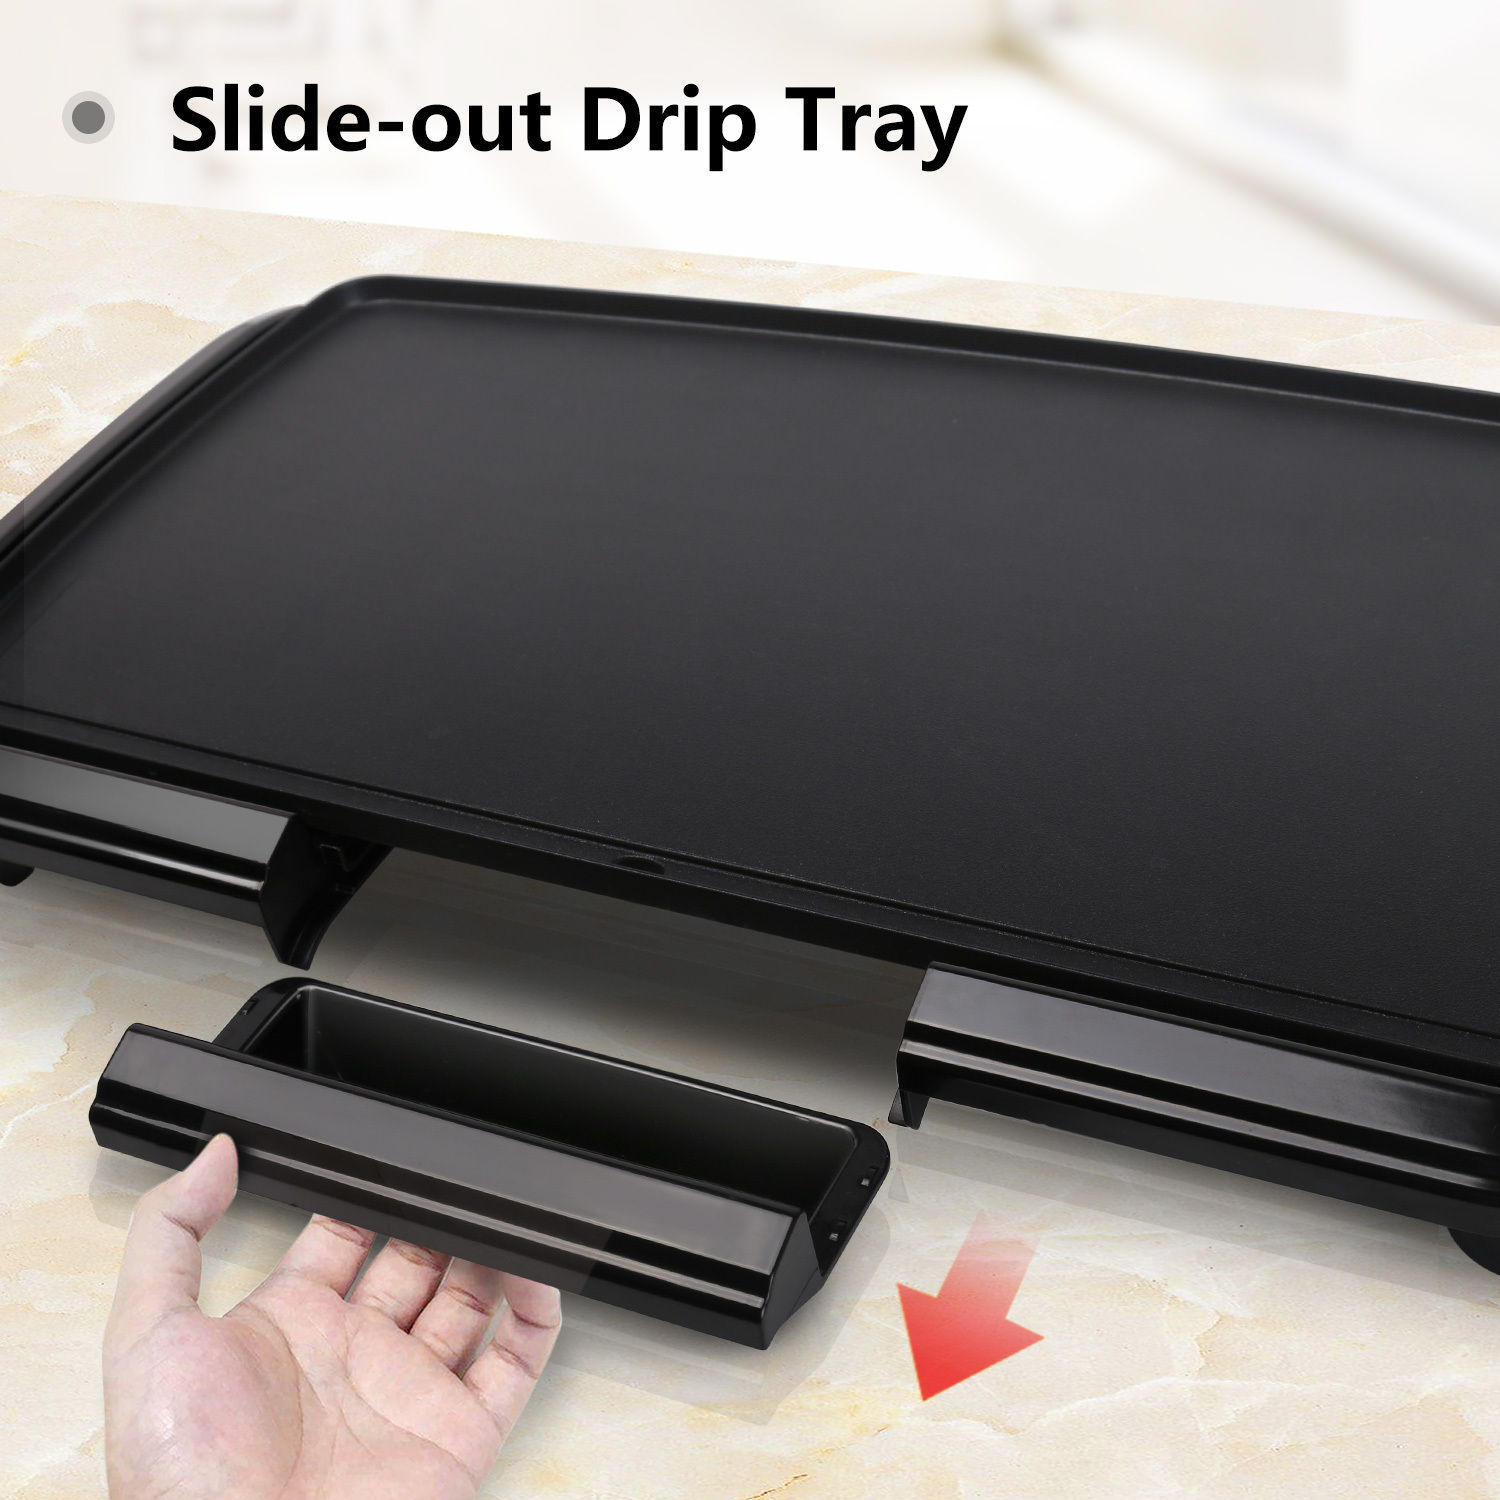 Aigostar Electric Griddle Nonstick 1500W Pancake Griddle 8-Serving Electric Indoor Grill 5-Level Control with Adjustable Temperature & Oil Drip Tray for Easy Cleaning, 20” x 10” Family-Sized, Black